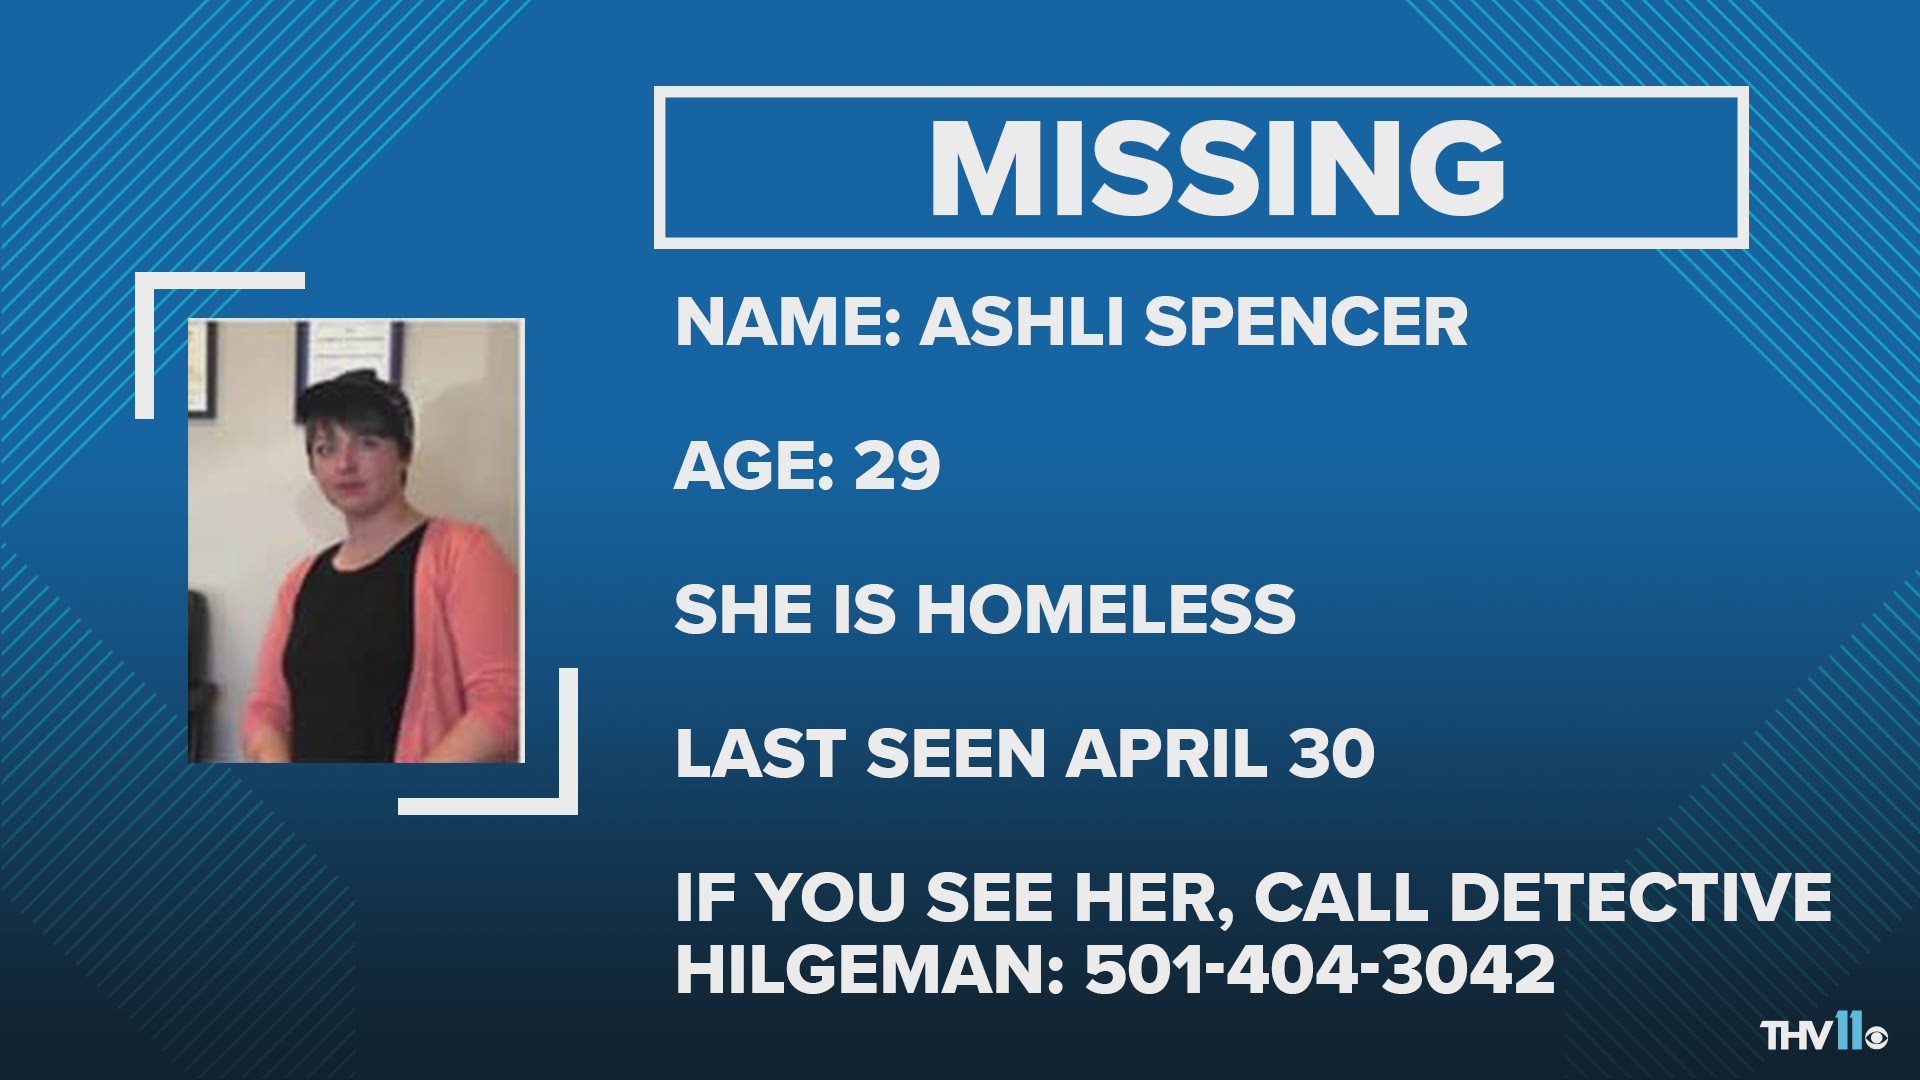 Ashli Spencer was last seen on April 30 and last heard from on May 4.